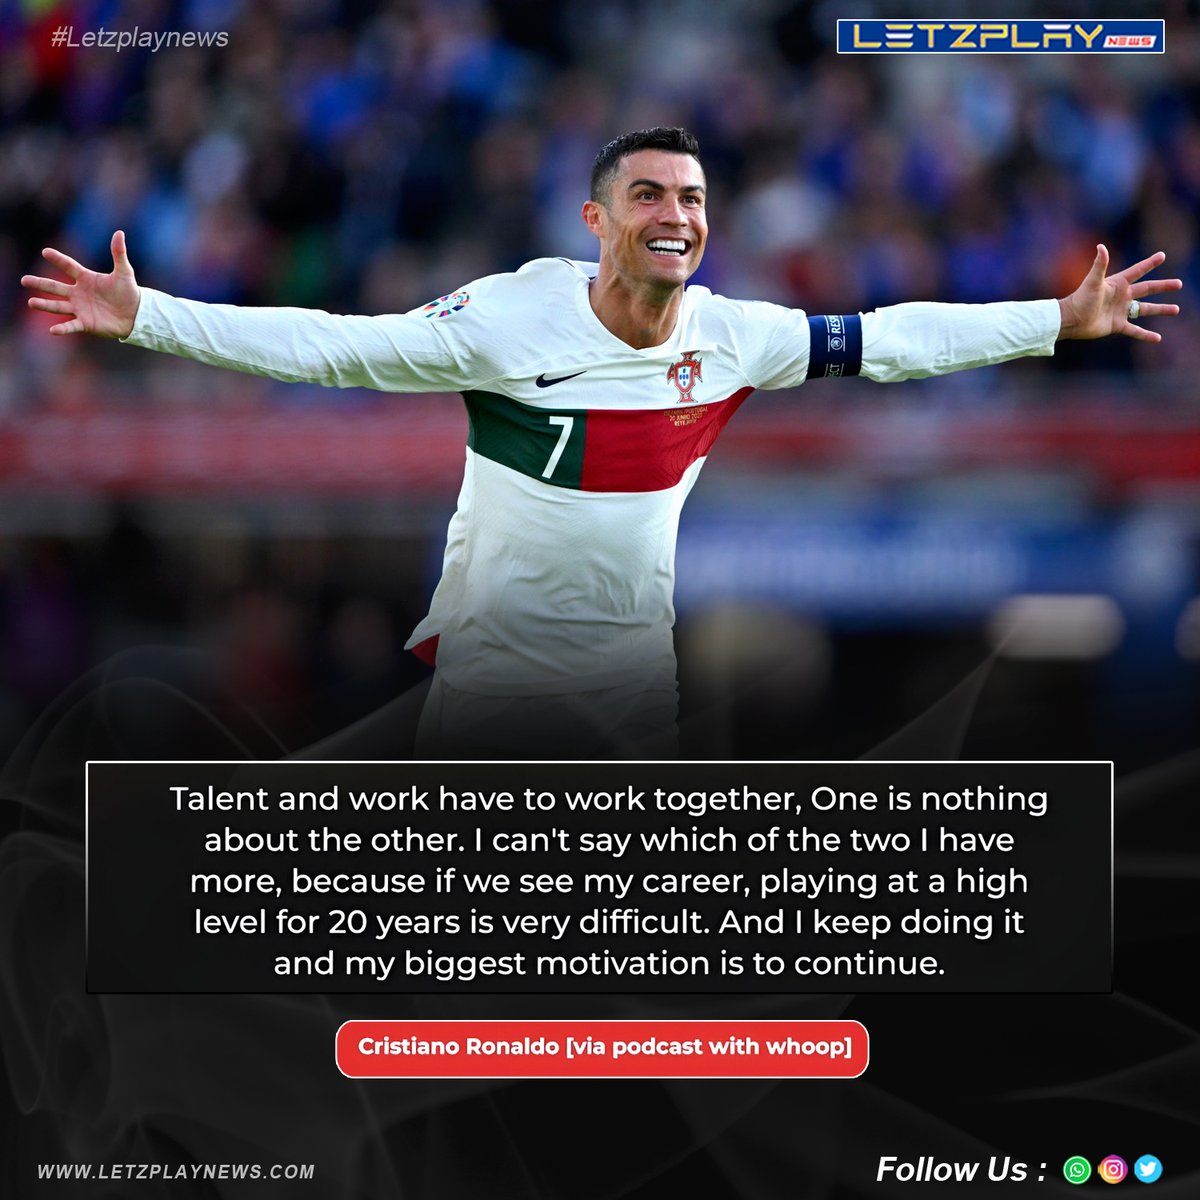 🌟👑🐐 Stay tuned to Cristiano Ronaldo's timeless wisdom on remaining at the pinnacle of world football for decades! 🔝⚽ 

What's his secret to success? 
.
.
.
.
#CristianoRonaldo #FootballLegend #GOAT #Inspiration #SuccessJourney 🏆🔥